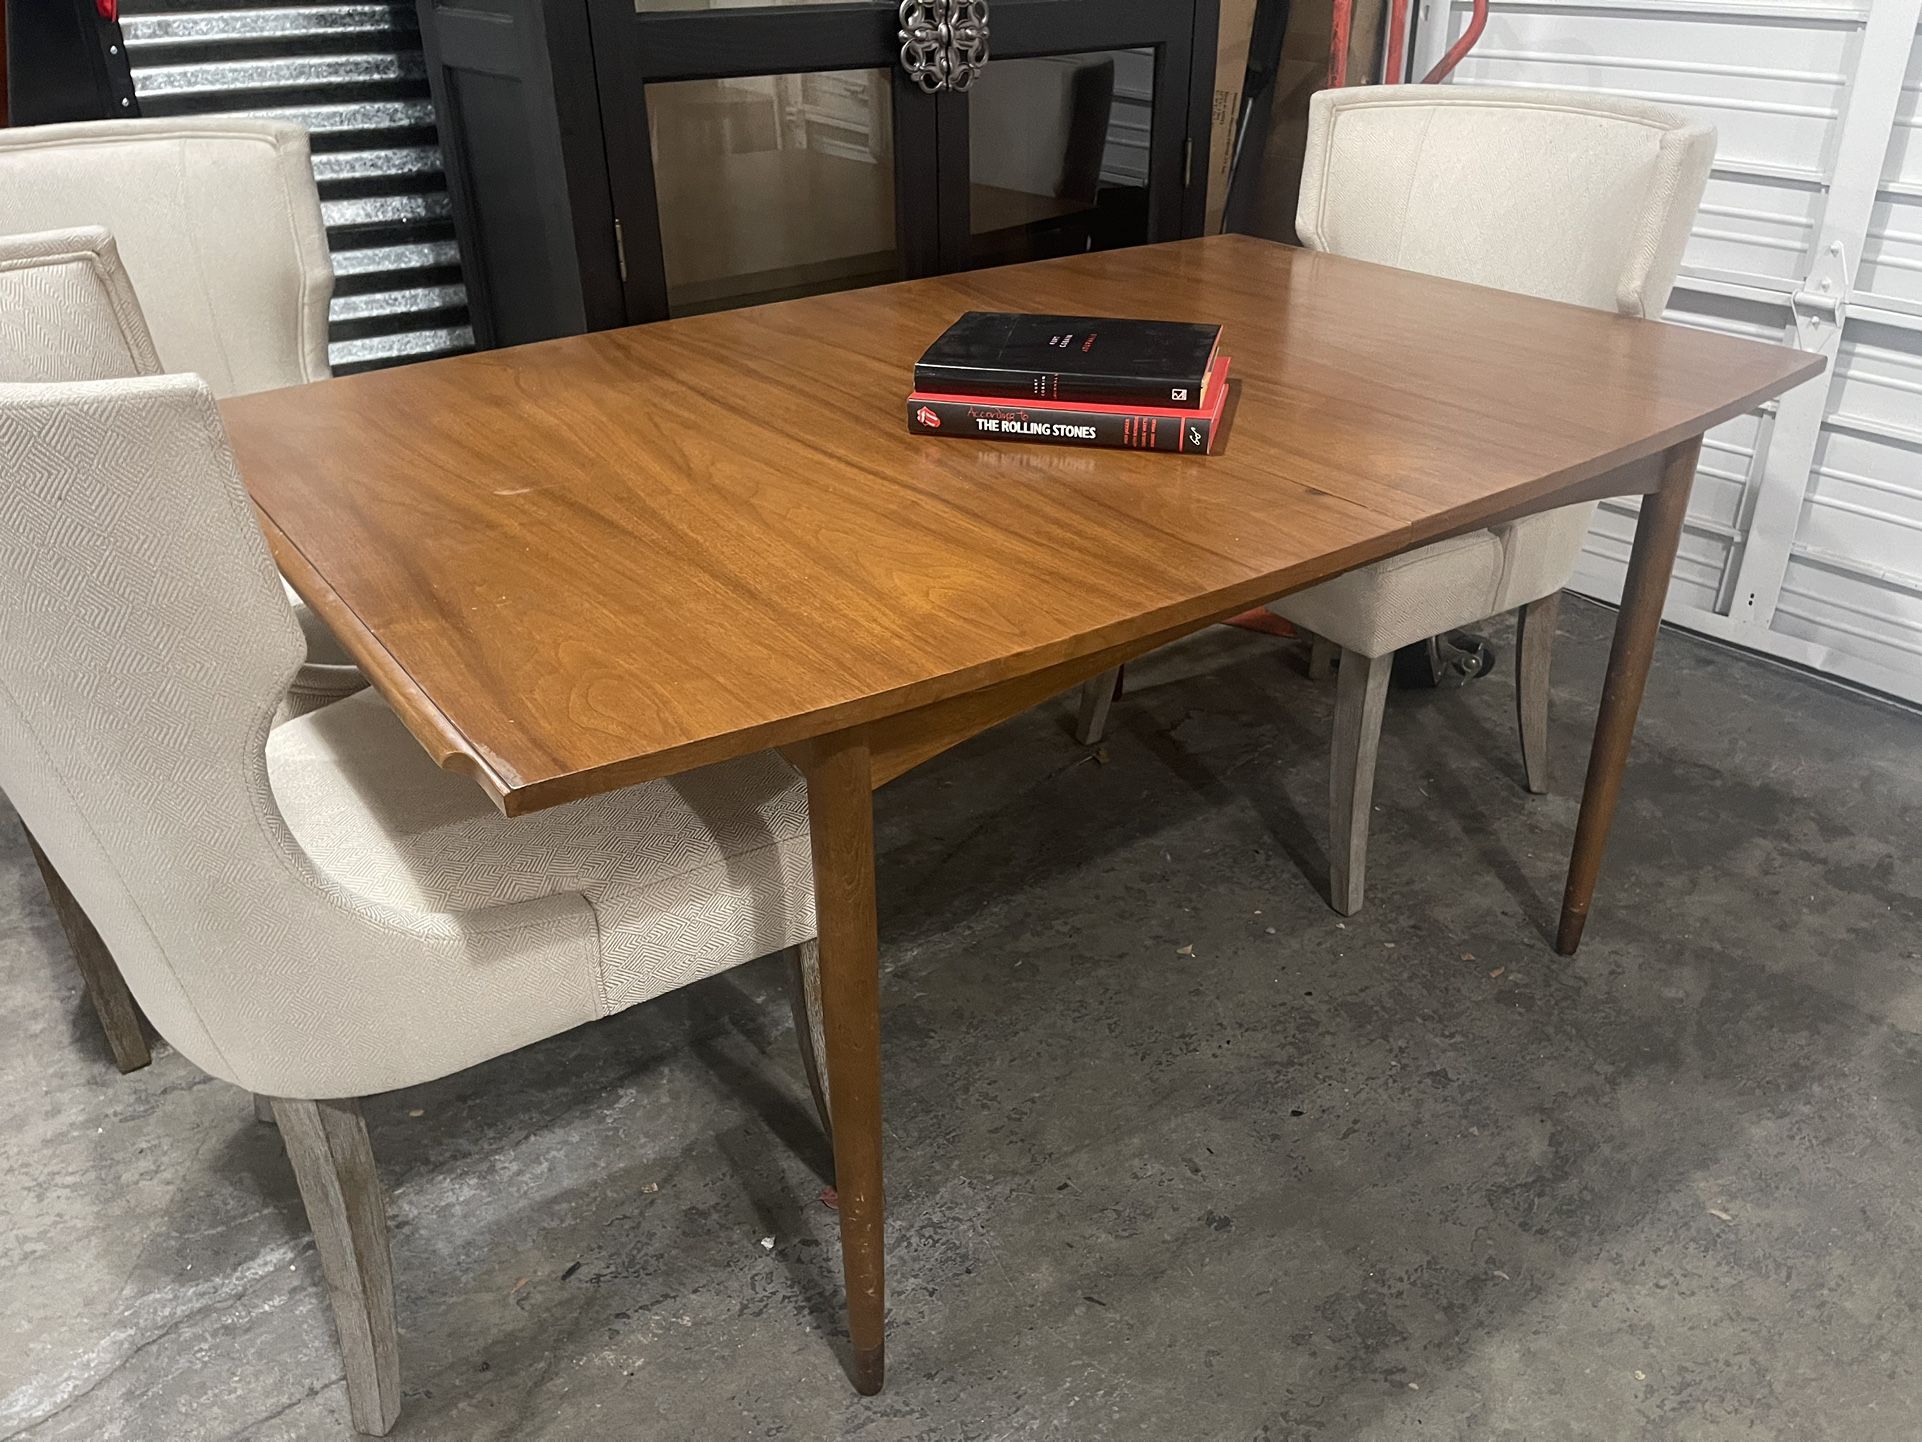 Danish Dining Table Delivery Available 